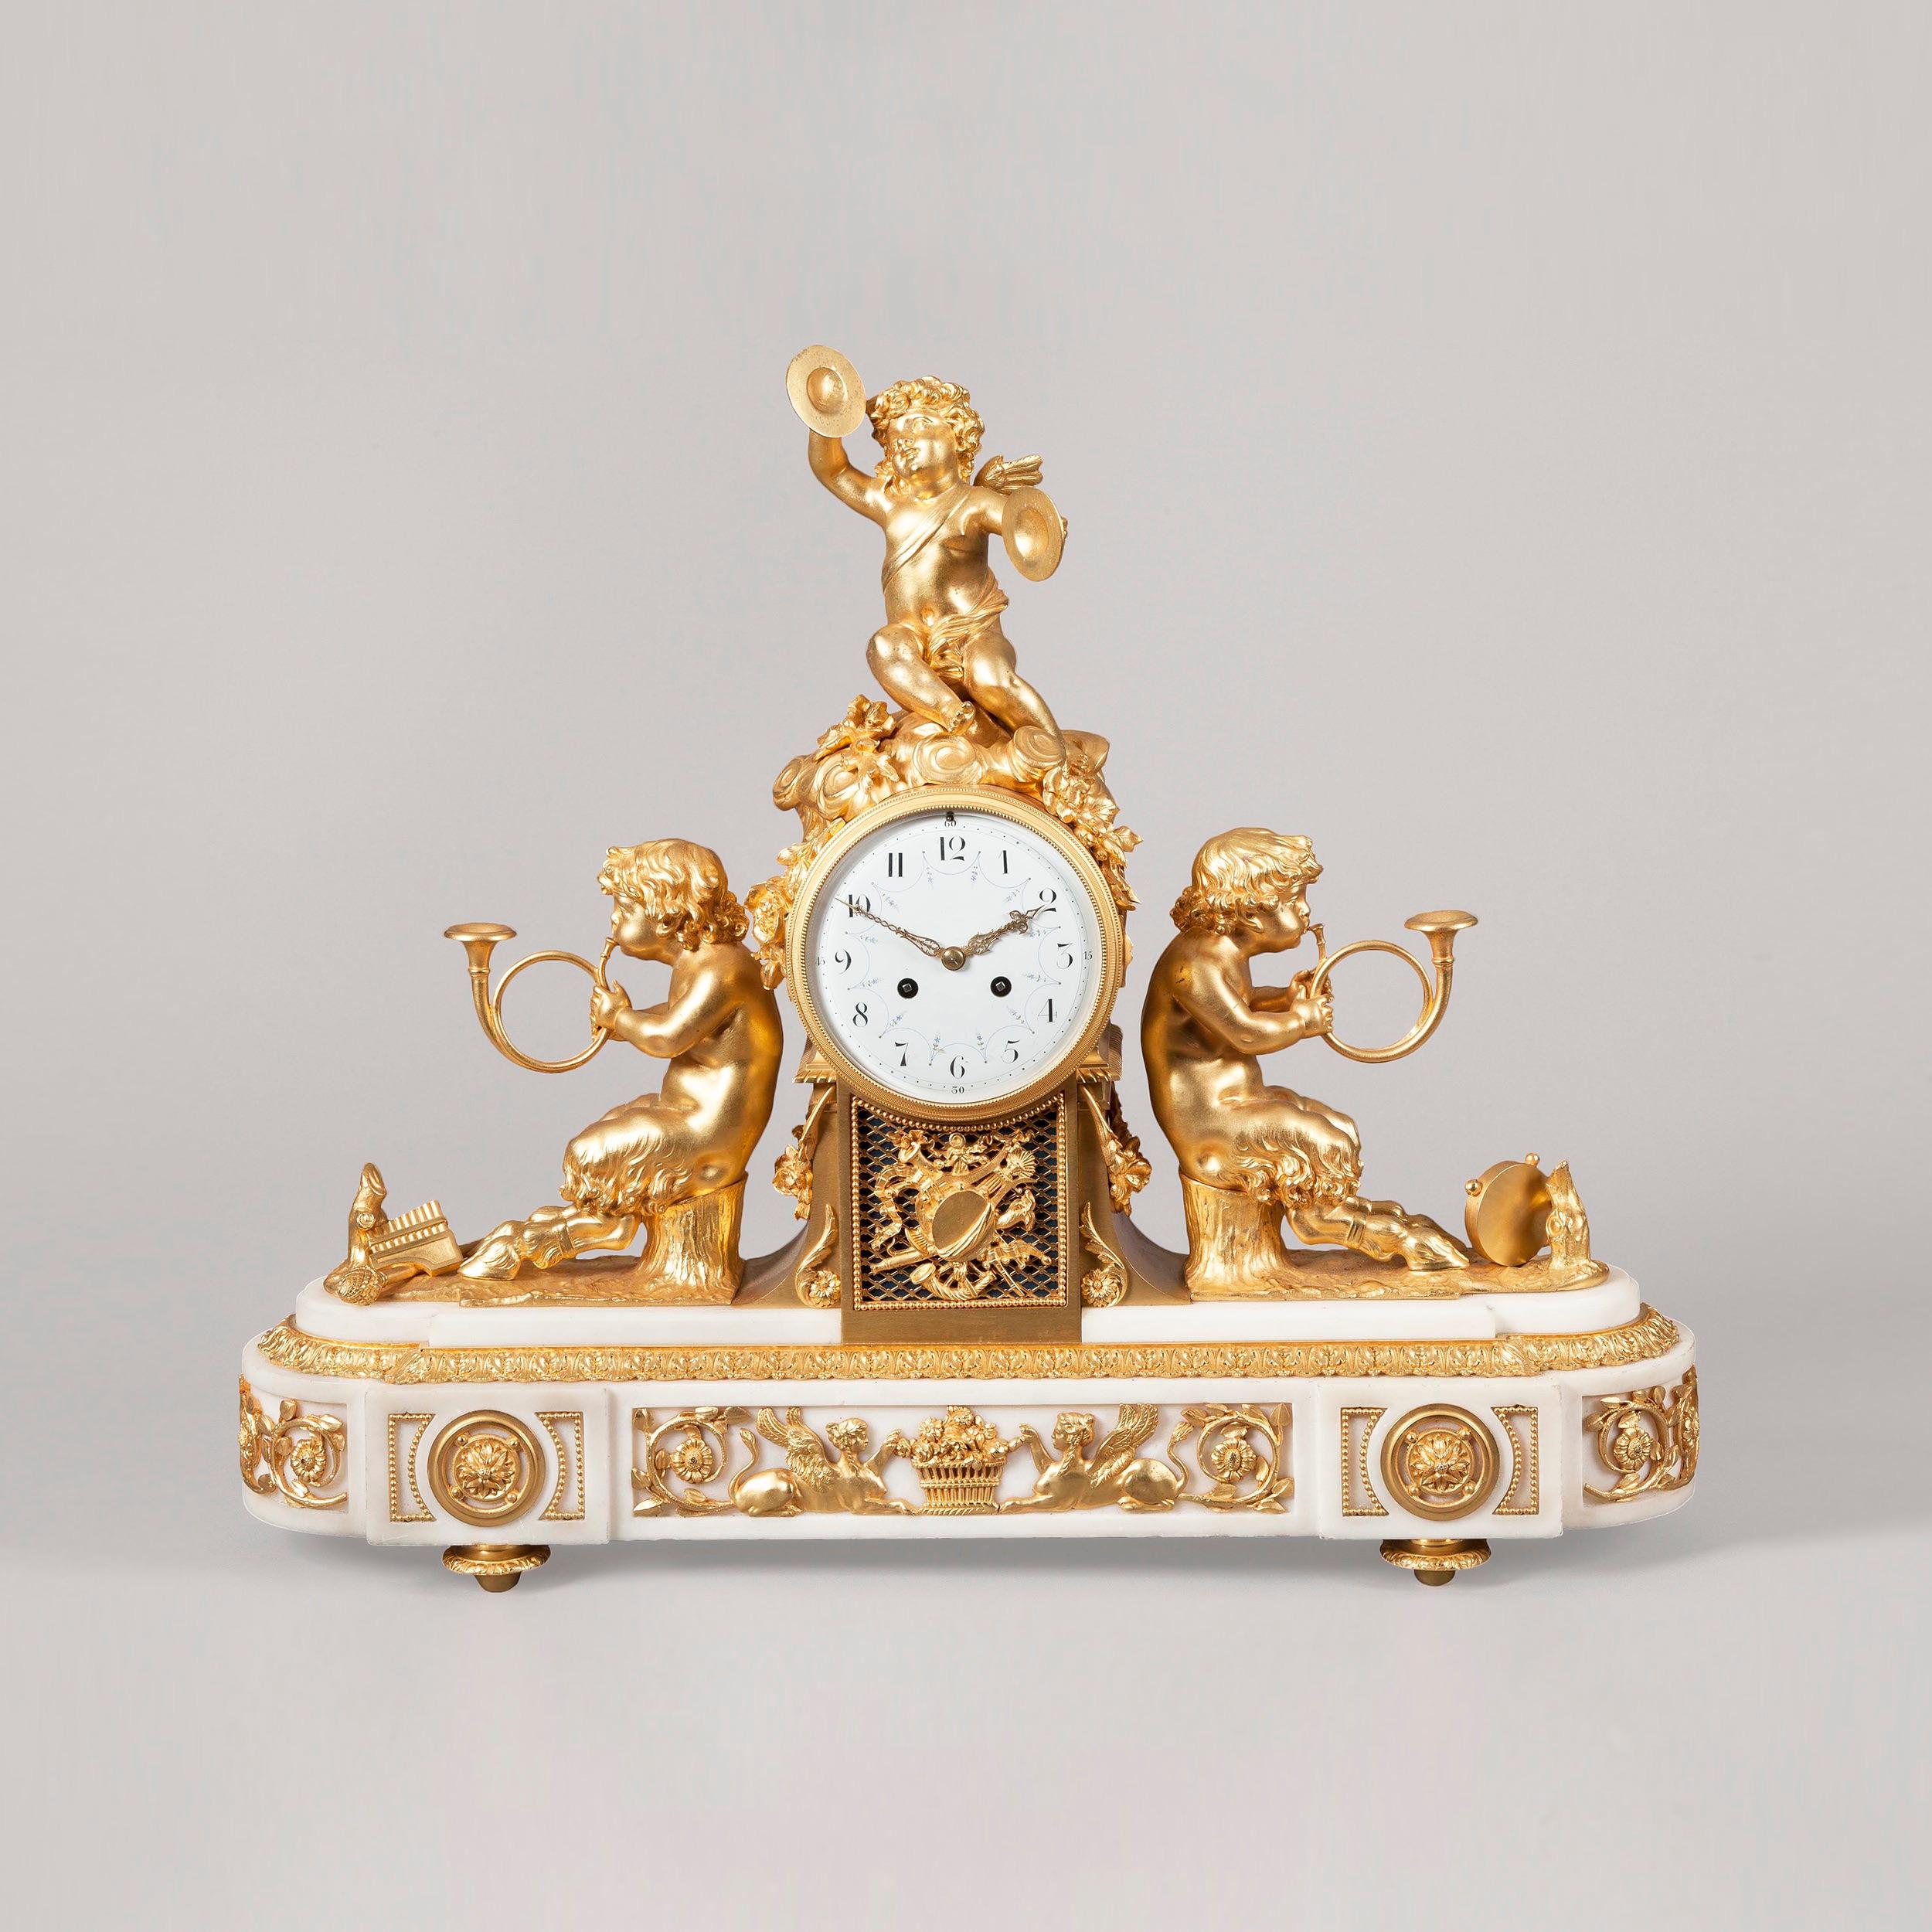 A mantel clock in the Louis XV manner.

Constructed in white Carrara marble and gilt bronze; the rectangular form base having bowed ends, rises from gilt toupie feet and has opposed gilt sphinxes and gilt bronze foliate mounts to the facia; the